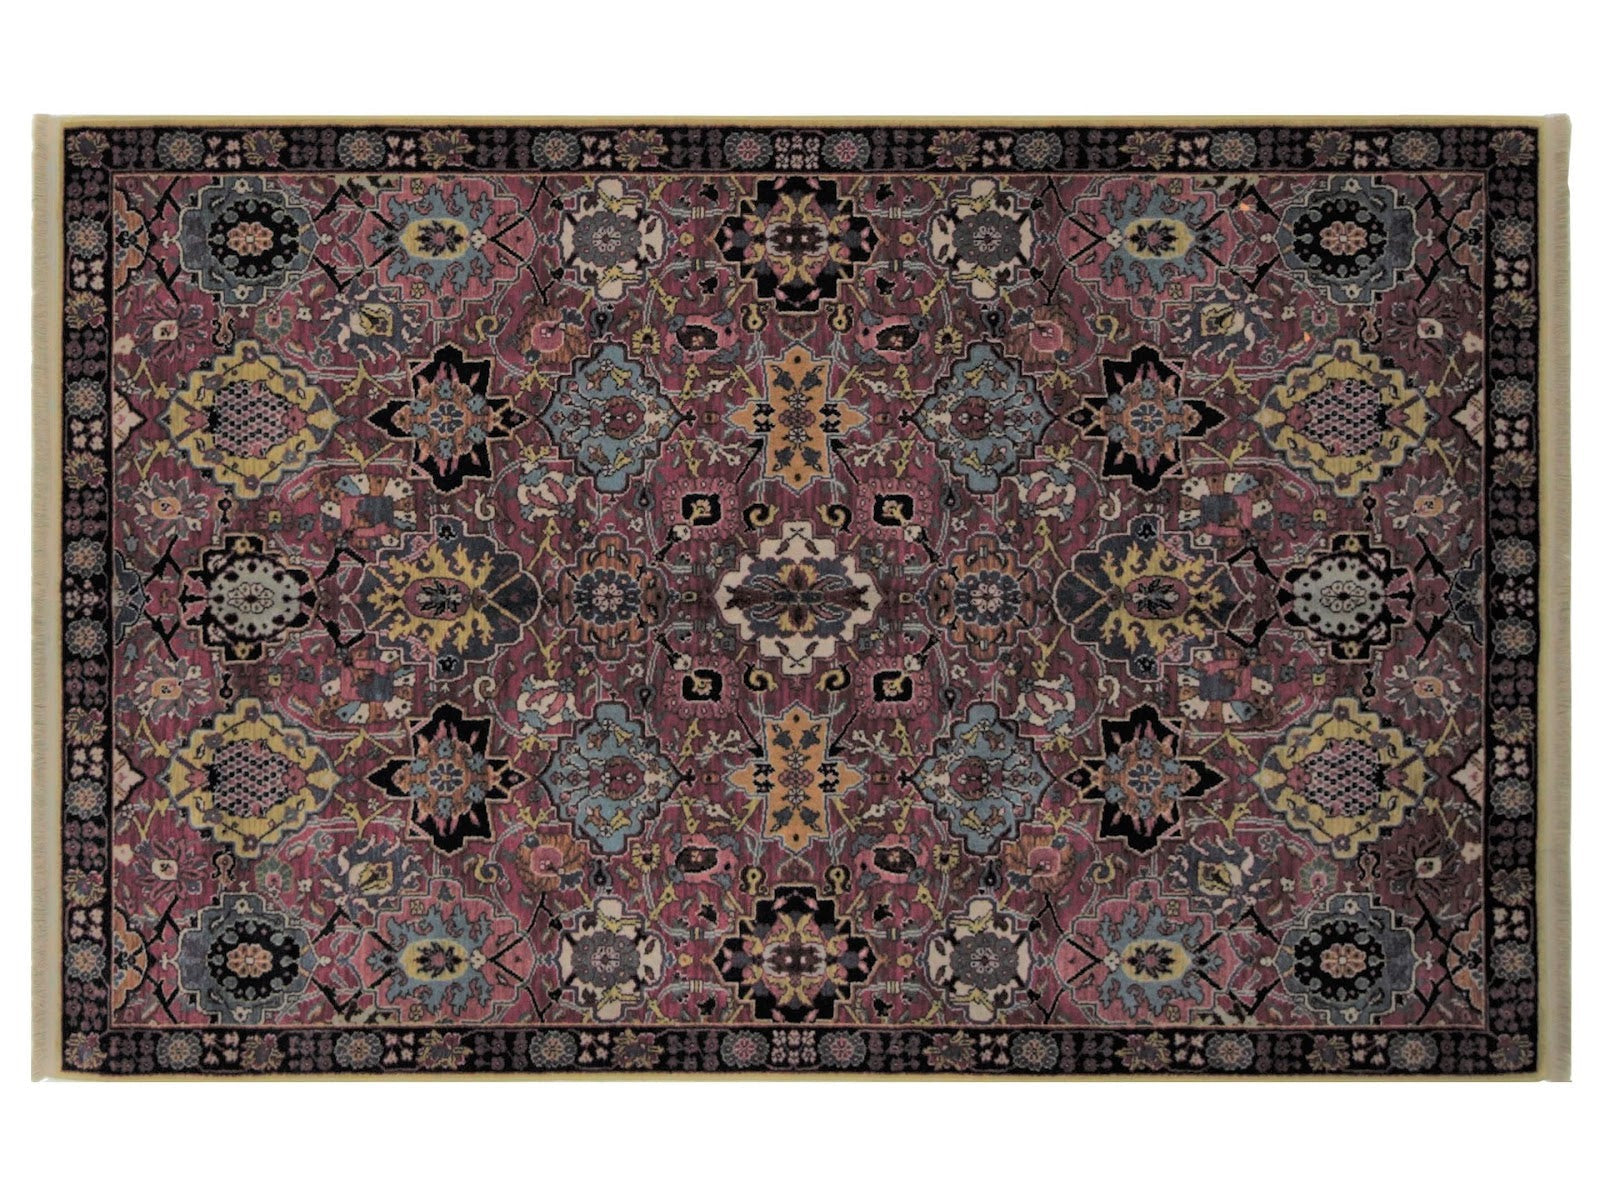 Luxury antique Kerman Persian rug, distinguished by its unusual pink color and itricate design, handcrafted in Persia.